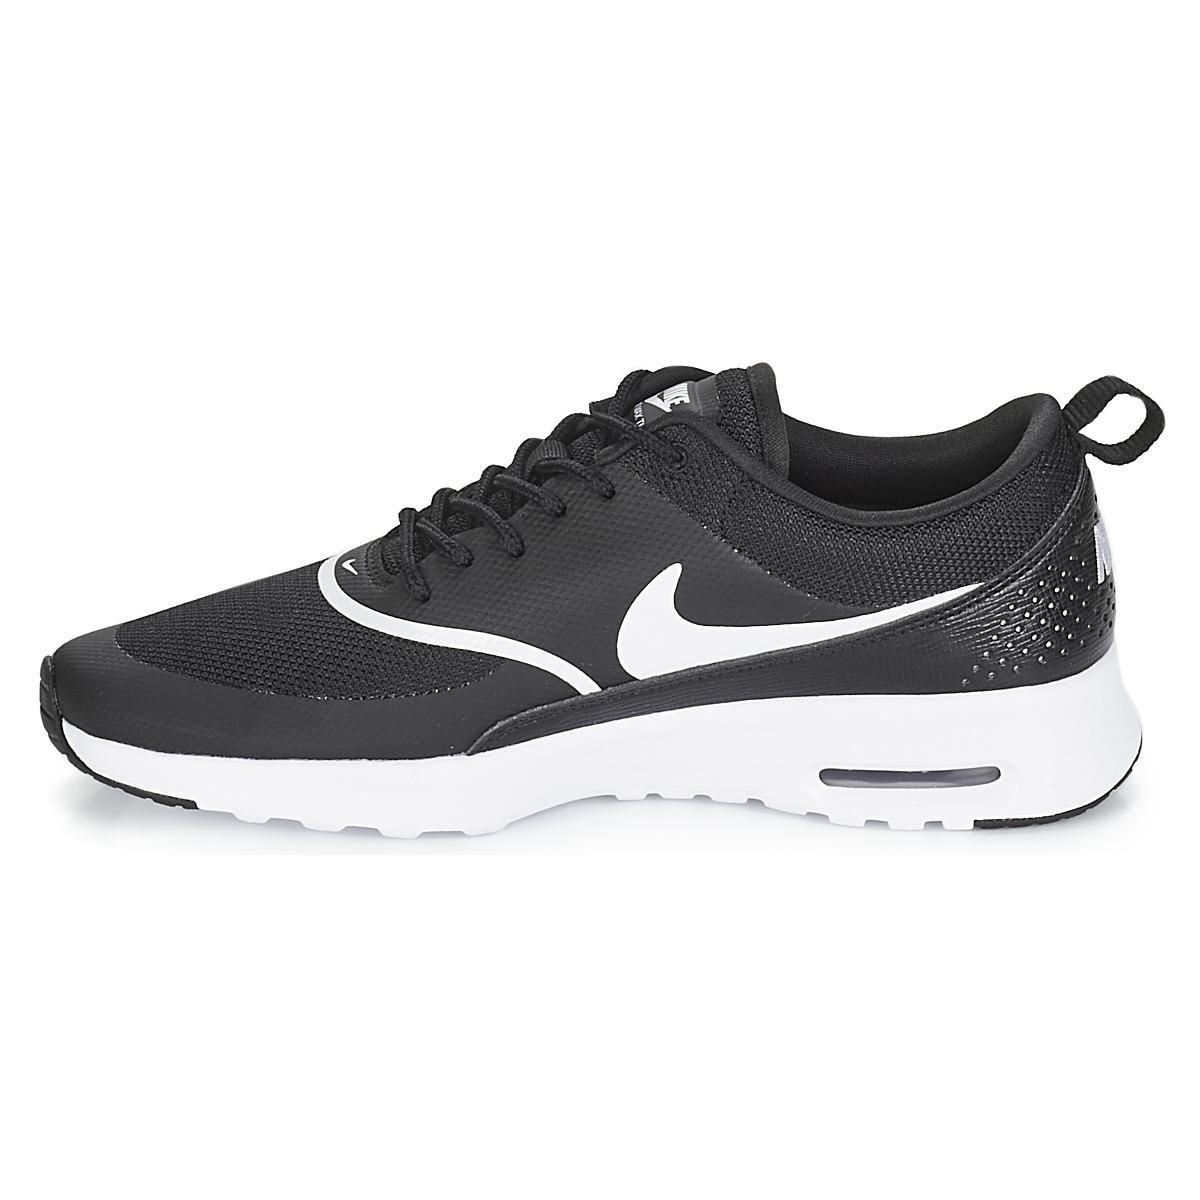 Nike Air Max Thea Shoe in Black - Save 76% - Lyst